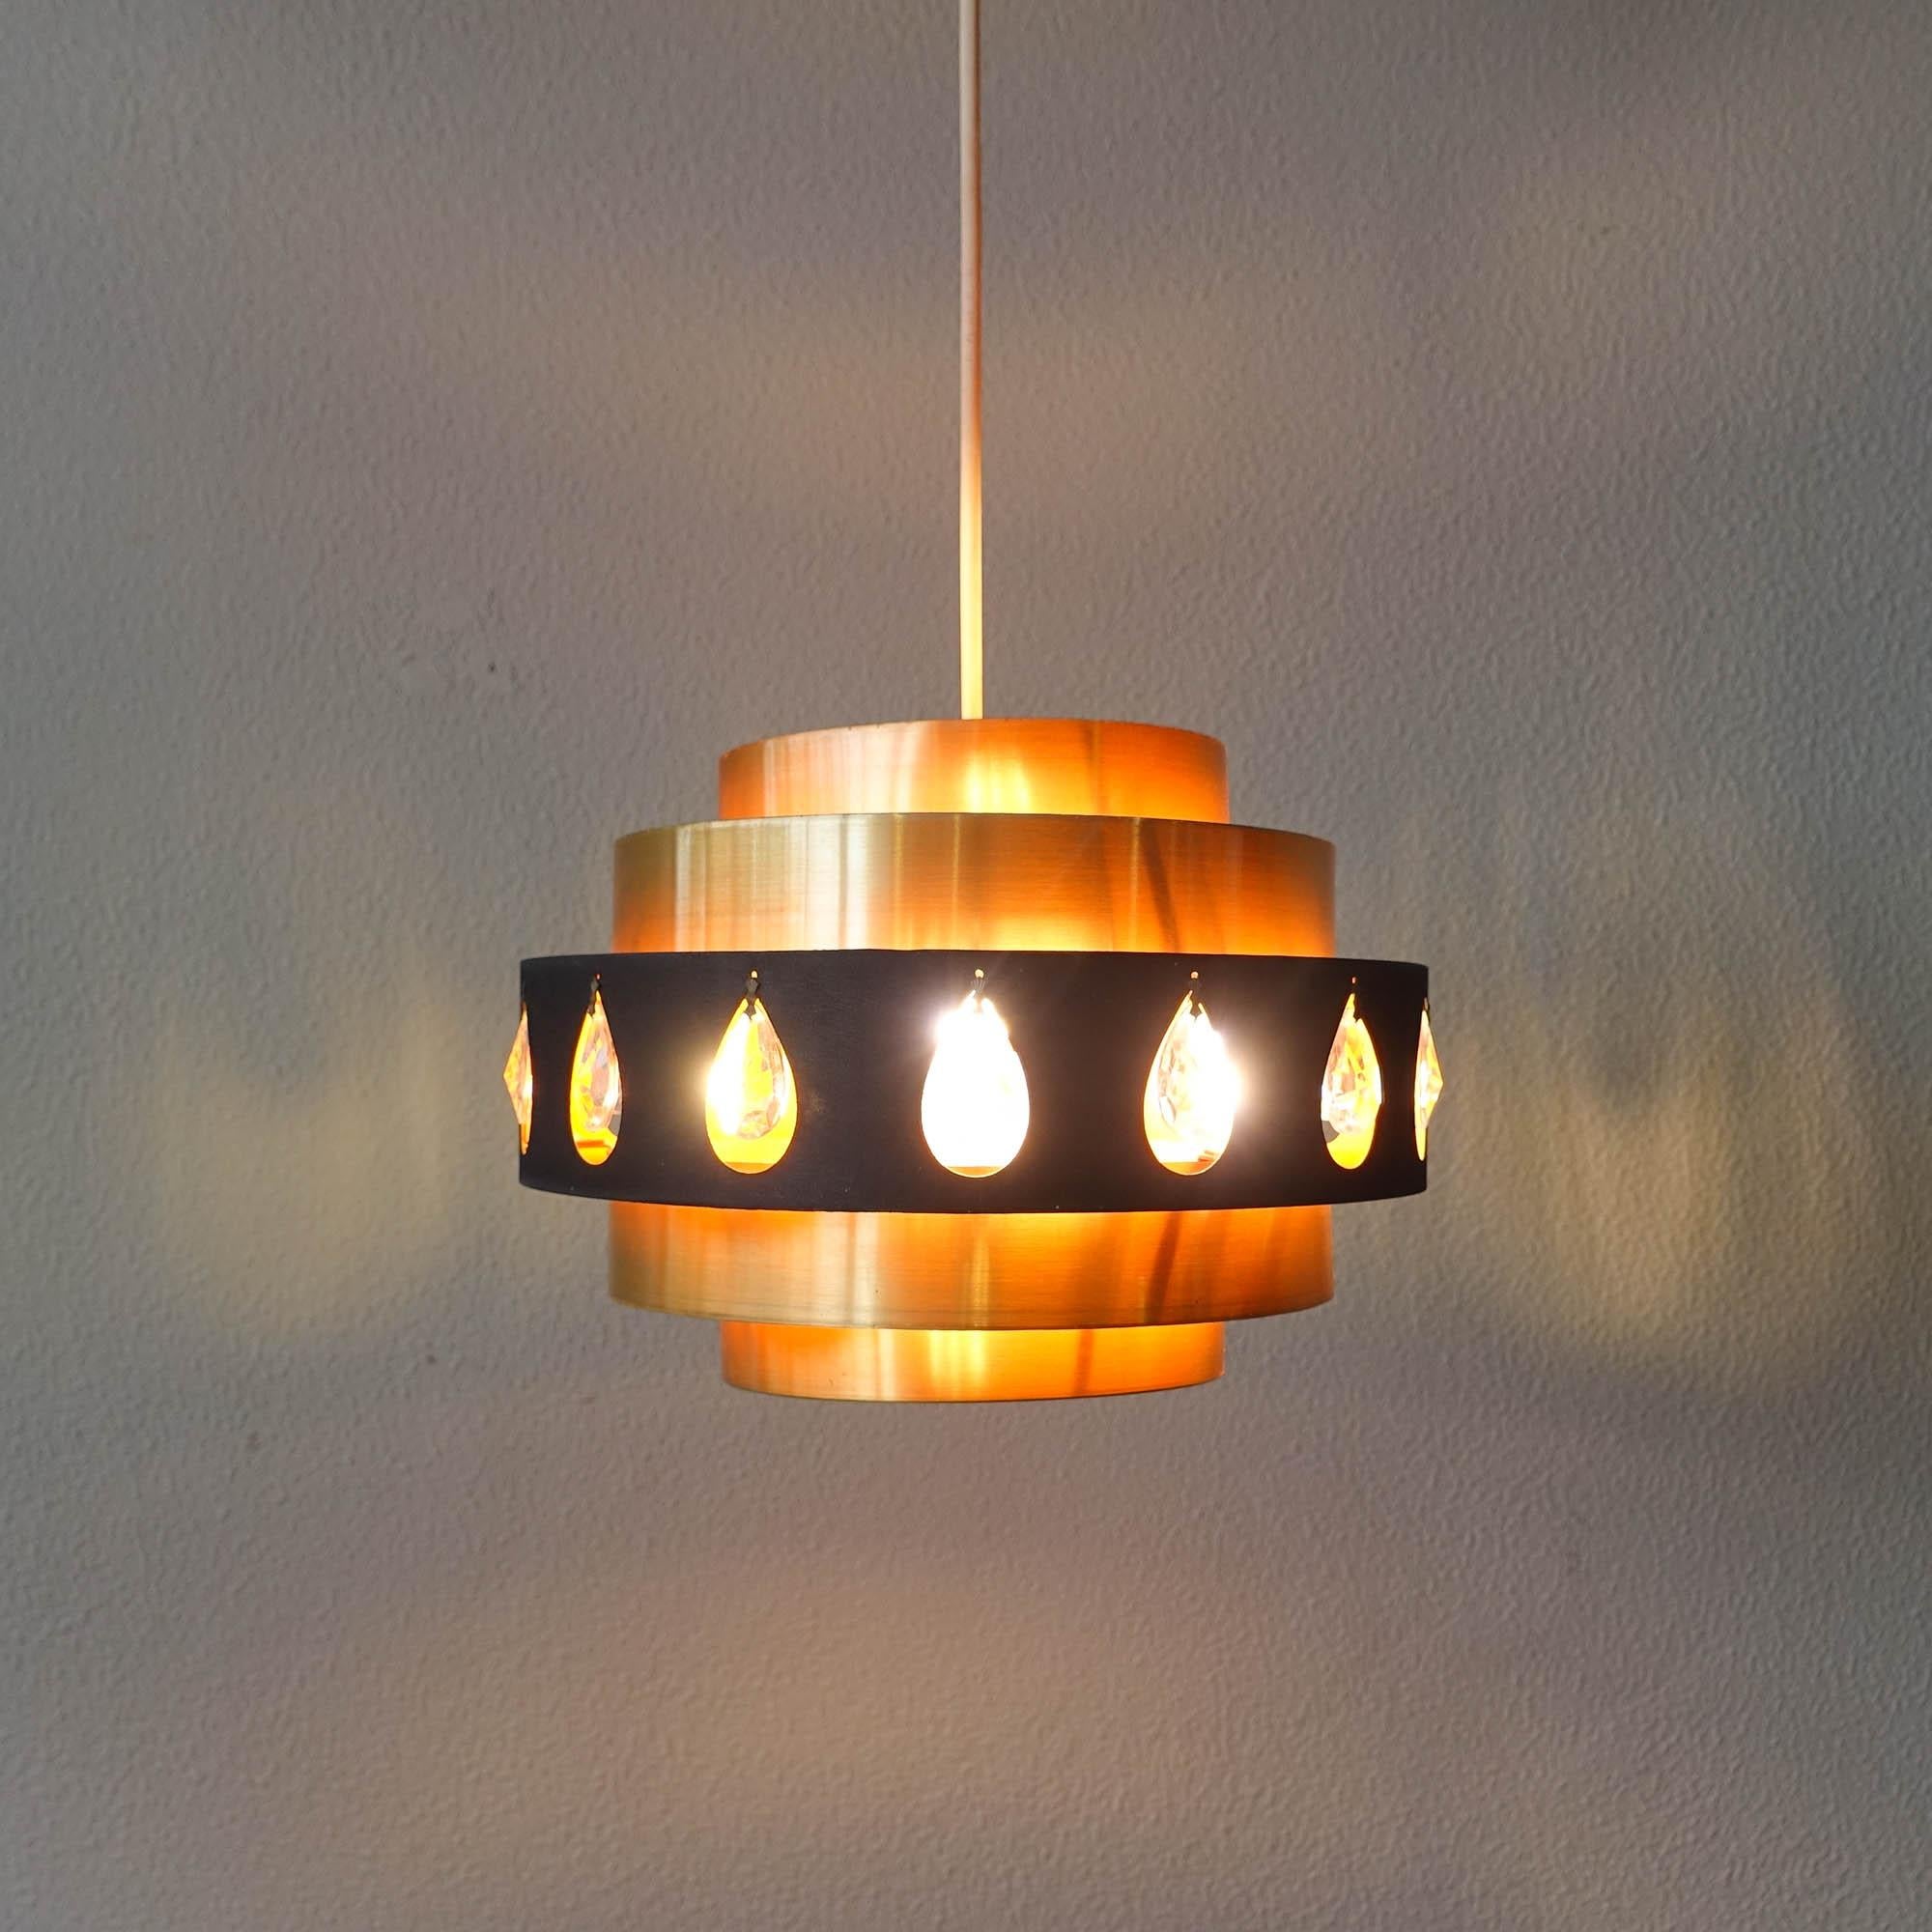 This pendant lamp was designed by Werner Schou for Coronell Elektro, in Denmark during the 1970's. The lamp is made of aluminum in black and gold, with glass inserts in the black part. These glasses along with the orange paint inside reflect the